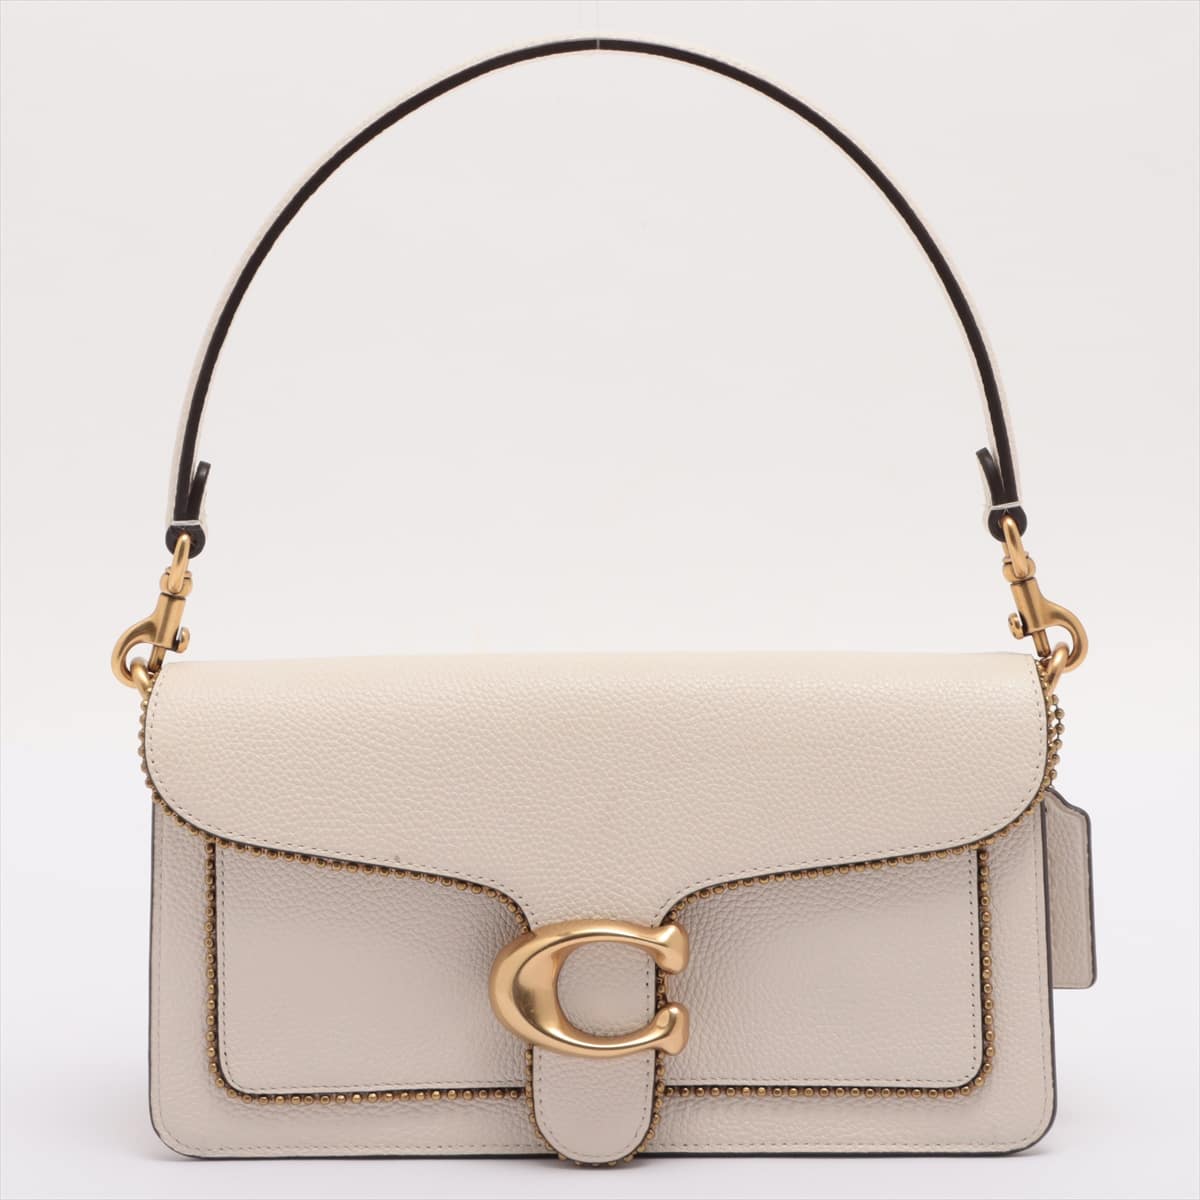 COACH Tabby Leather 2way shoulder bag White 7168